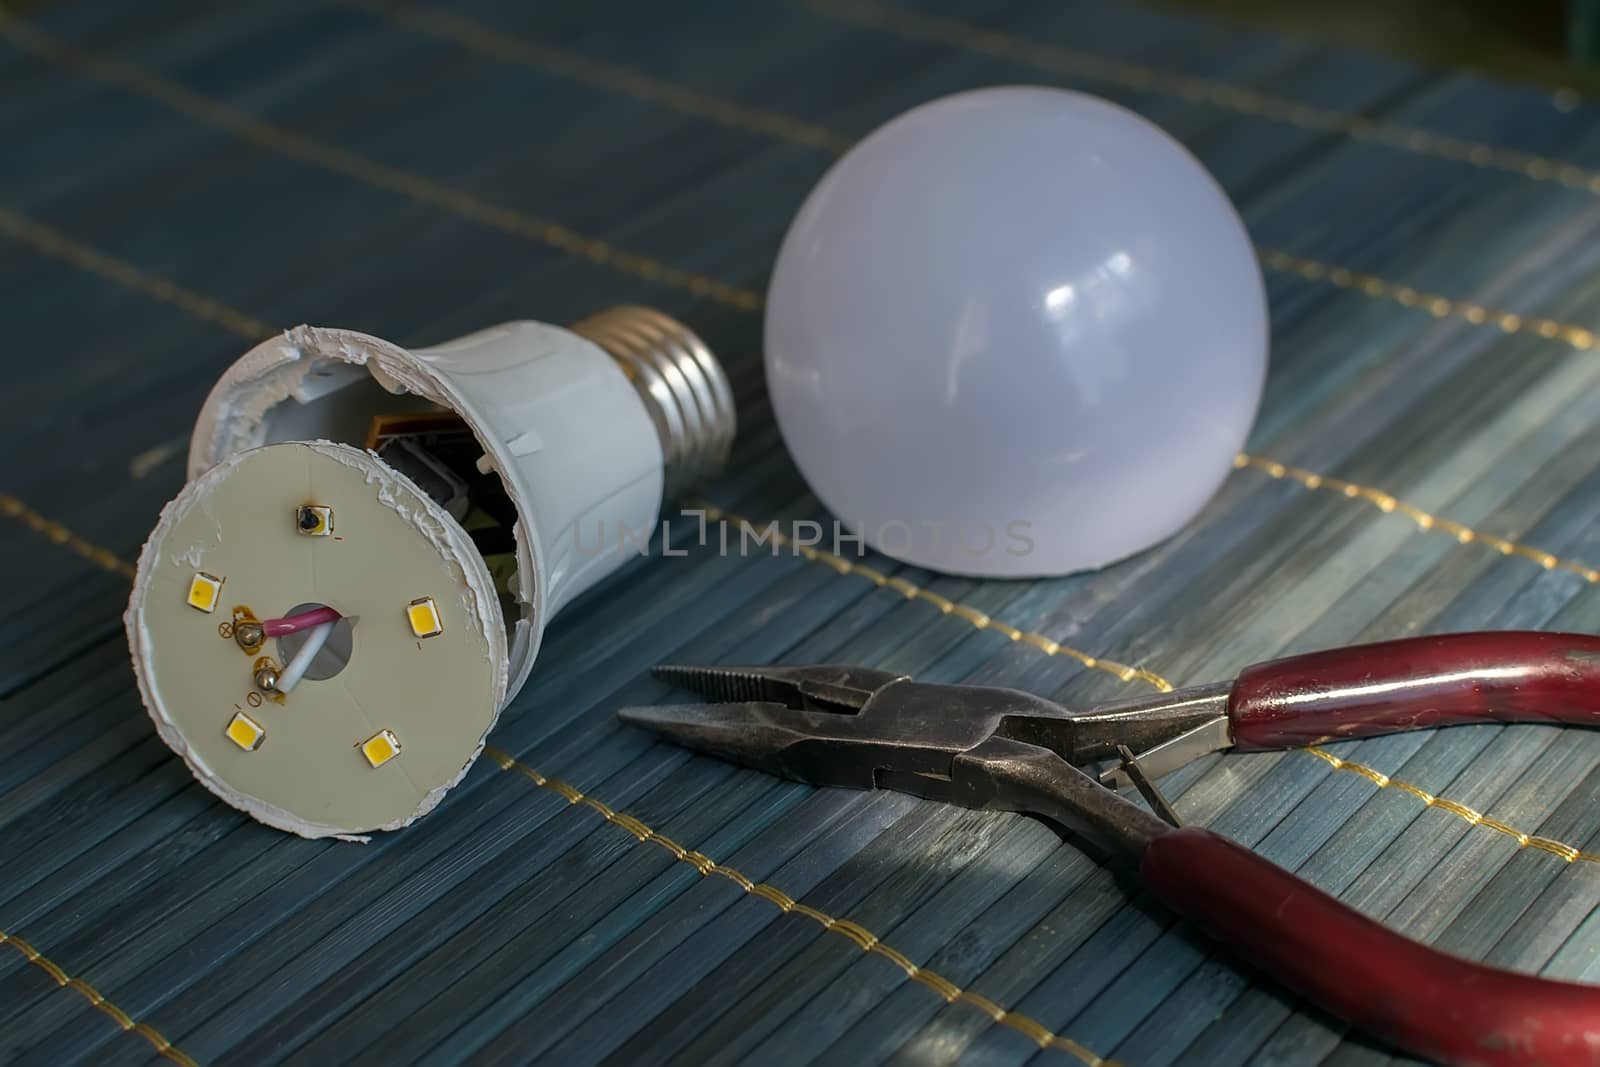 faulty, disassembled led household lamp by jk3030